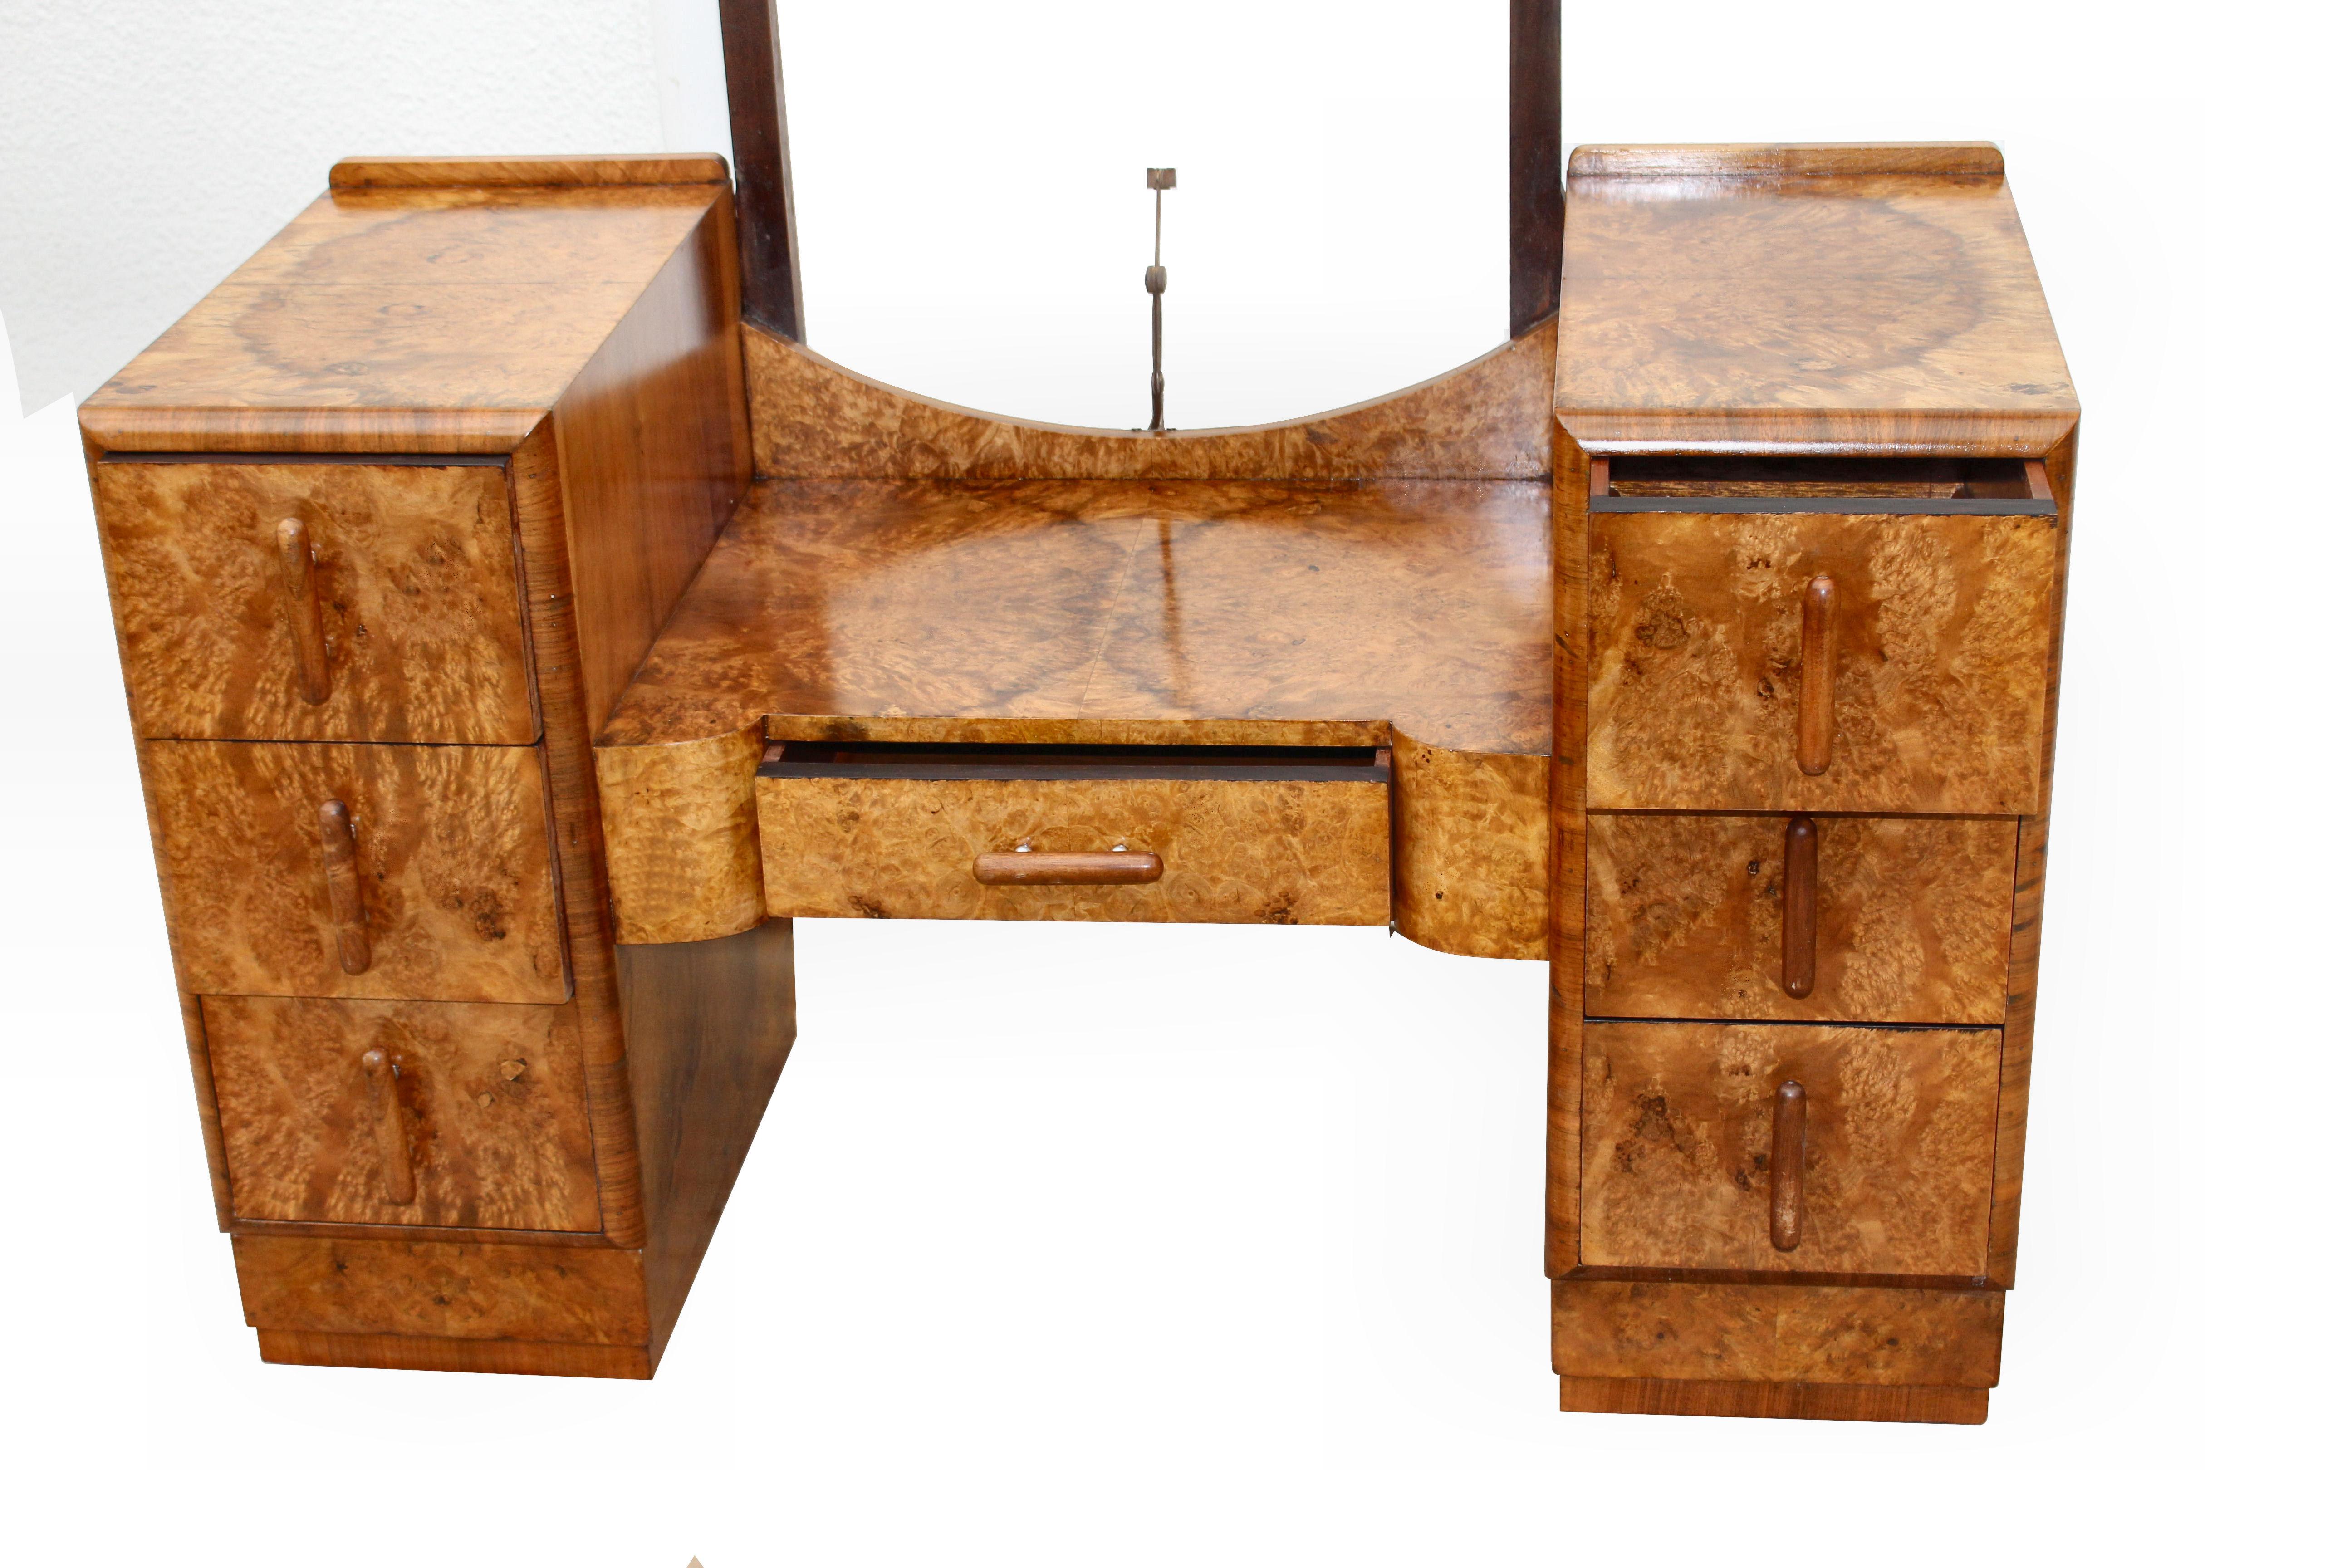 For those with a more refined taste in quality we are pleased to be able to offer you this English walnut Art Deco dressing table. Dating to the 1930's this beautiful quality dressing table is in lovely condition having been recently and